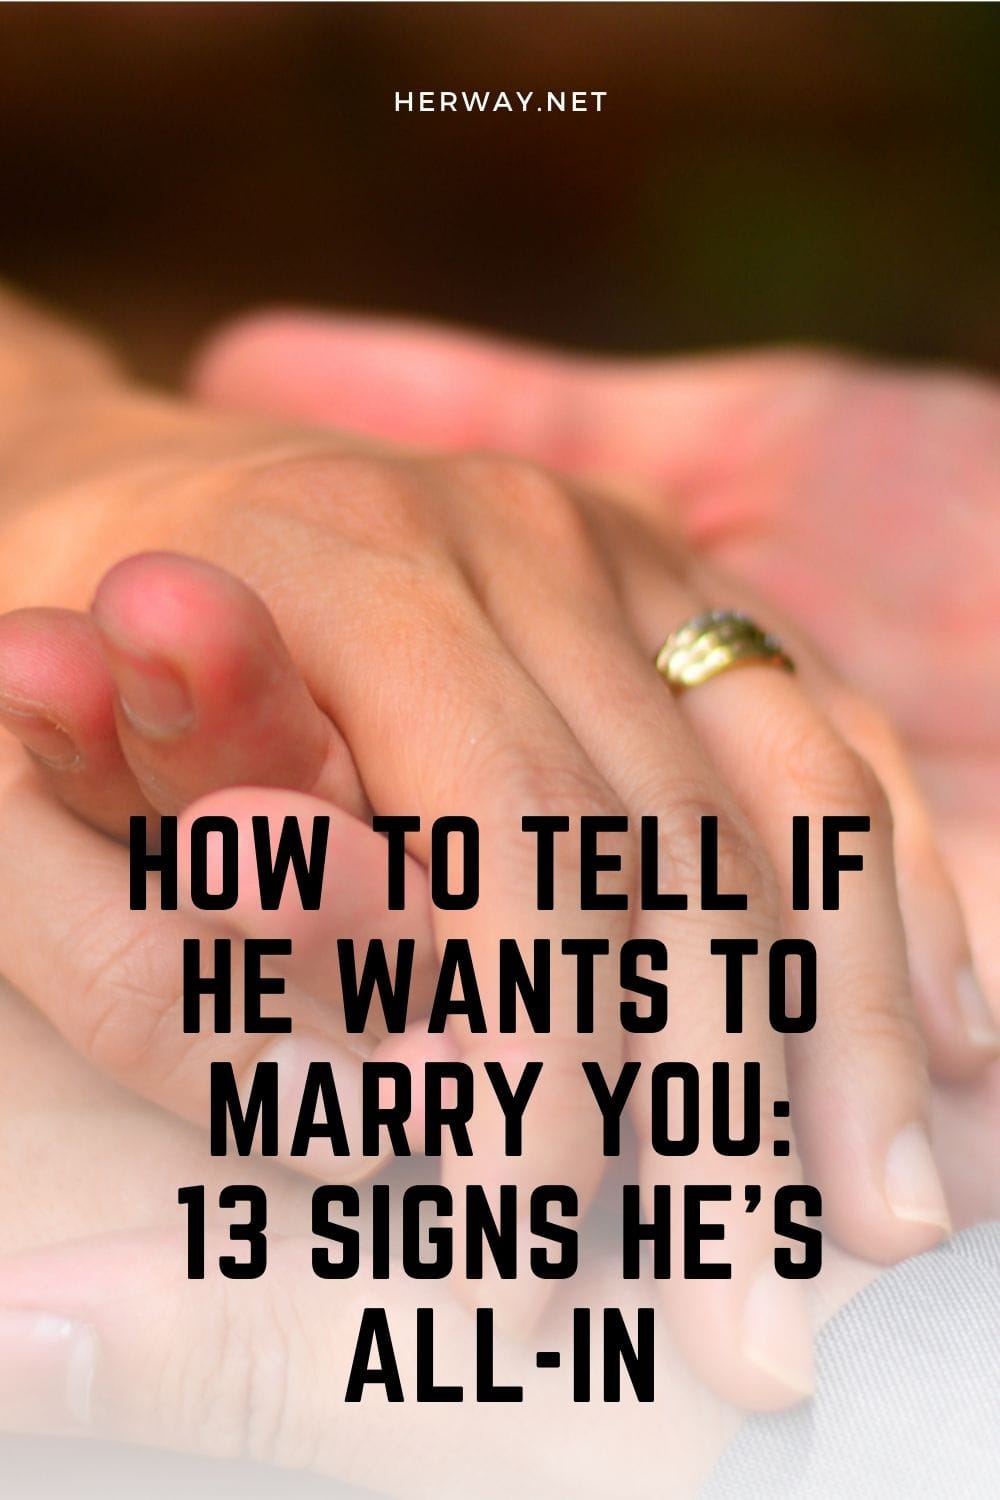 How To Tell If He Wants To Marry You: 13 Signs He's All-In